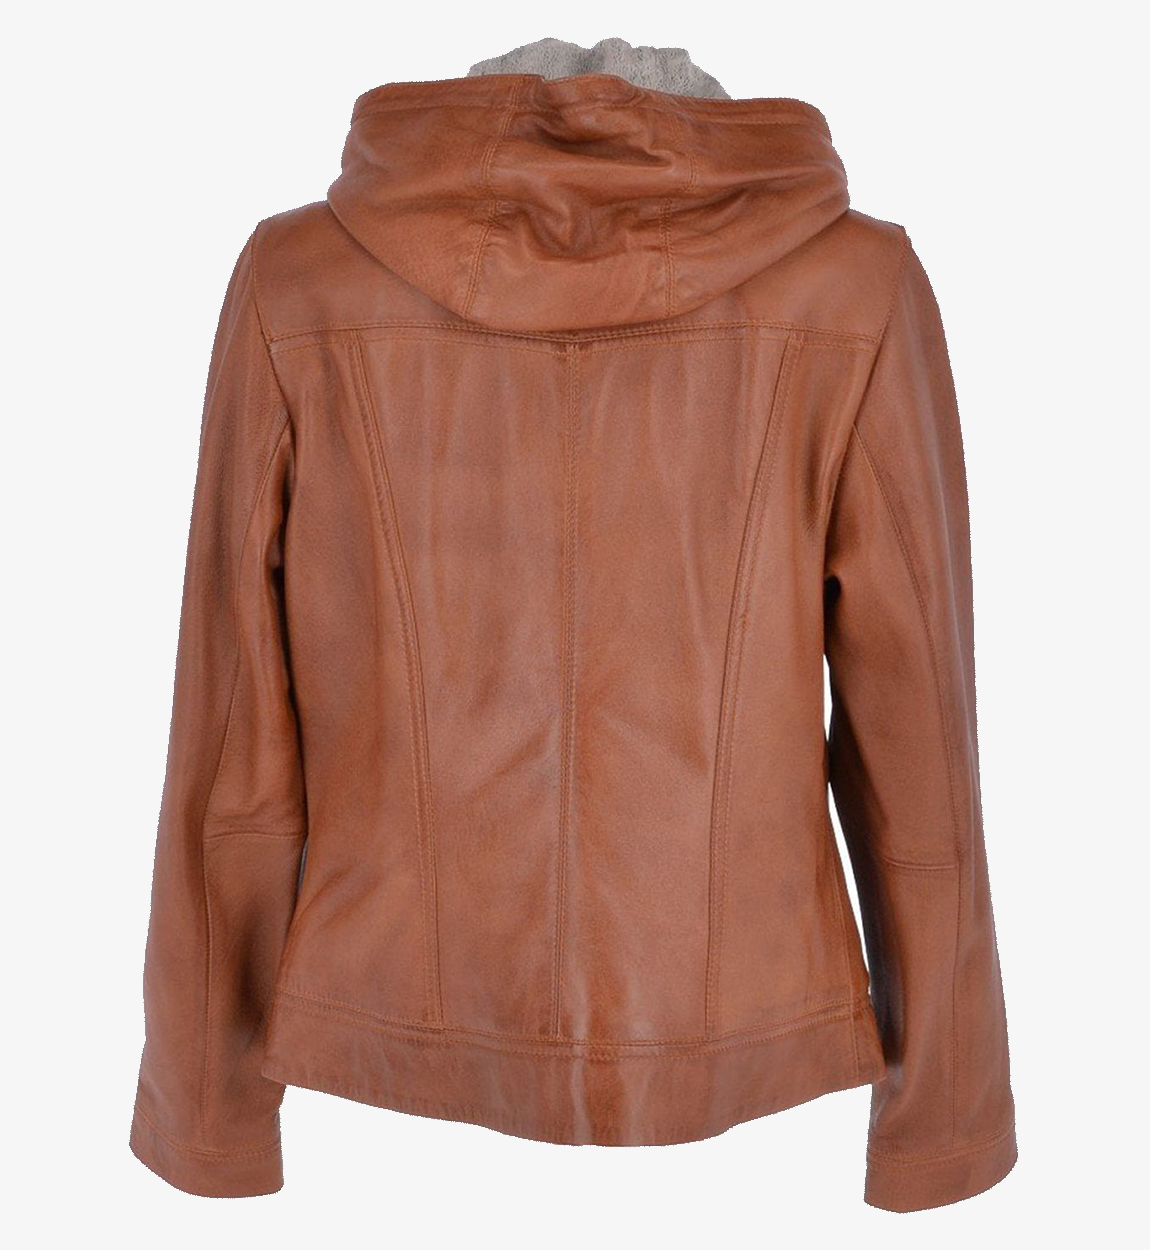 Women's Two-In-One Brown Leather Hooded Jacket